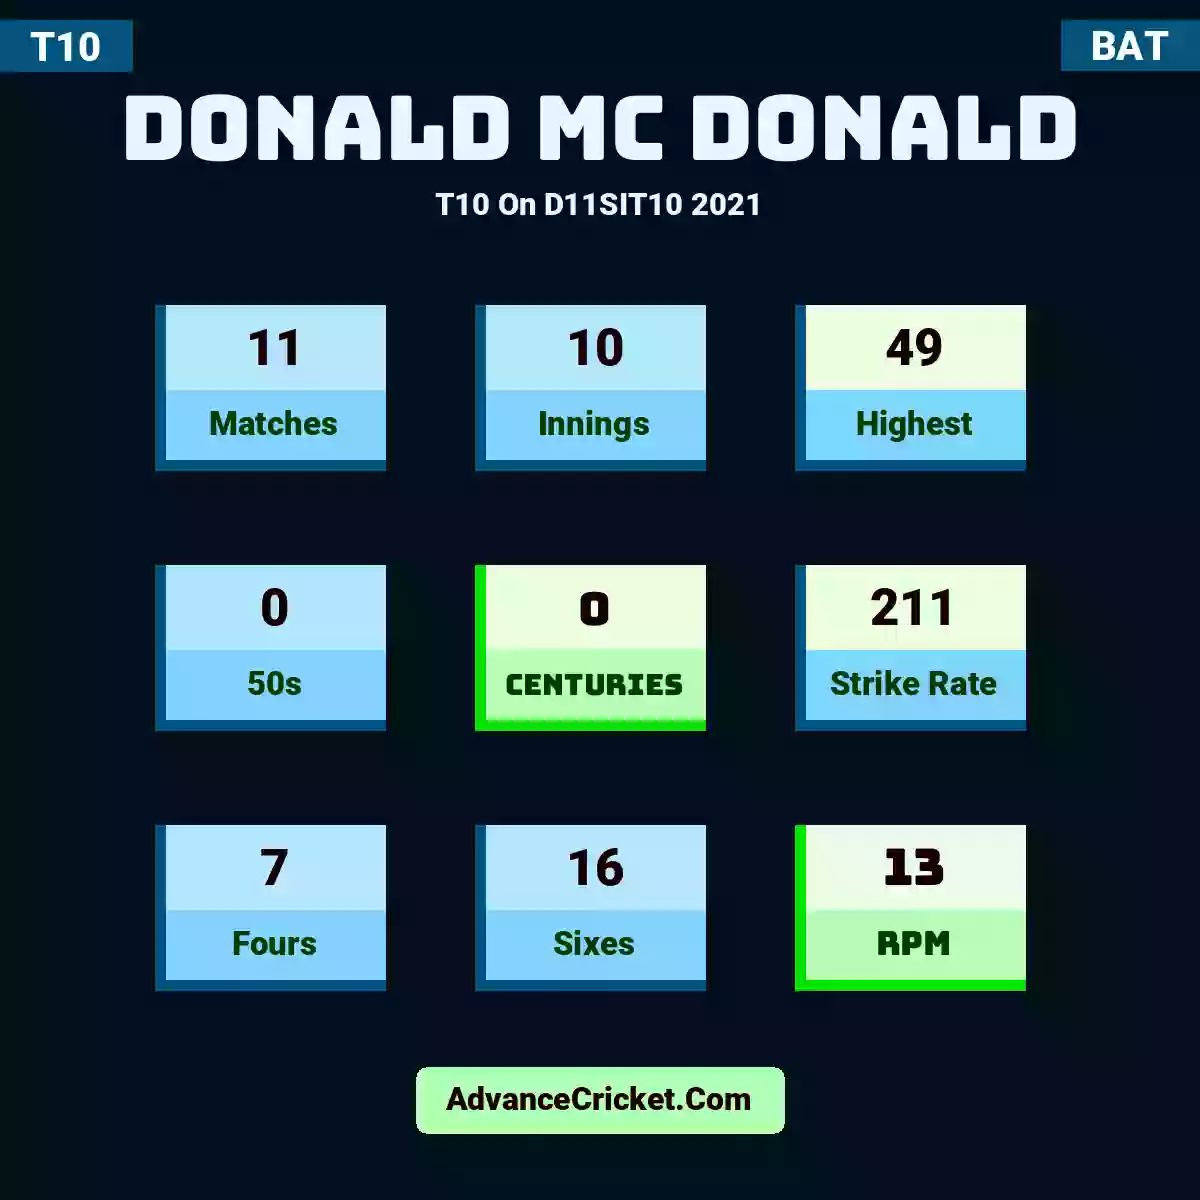 Donald Mc Donald T10  On D11SIT10 2021, Donald Mc Donald played 11 matches, scored 49 runs as highest, 0 half-centuries, and 0 centuries, with a strike rate of 211. D.Donald hit 7 fours and 16 sixes, with an RPM of 13.